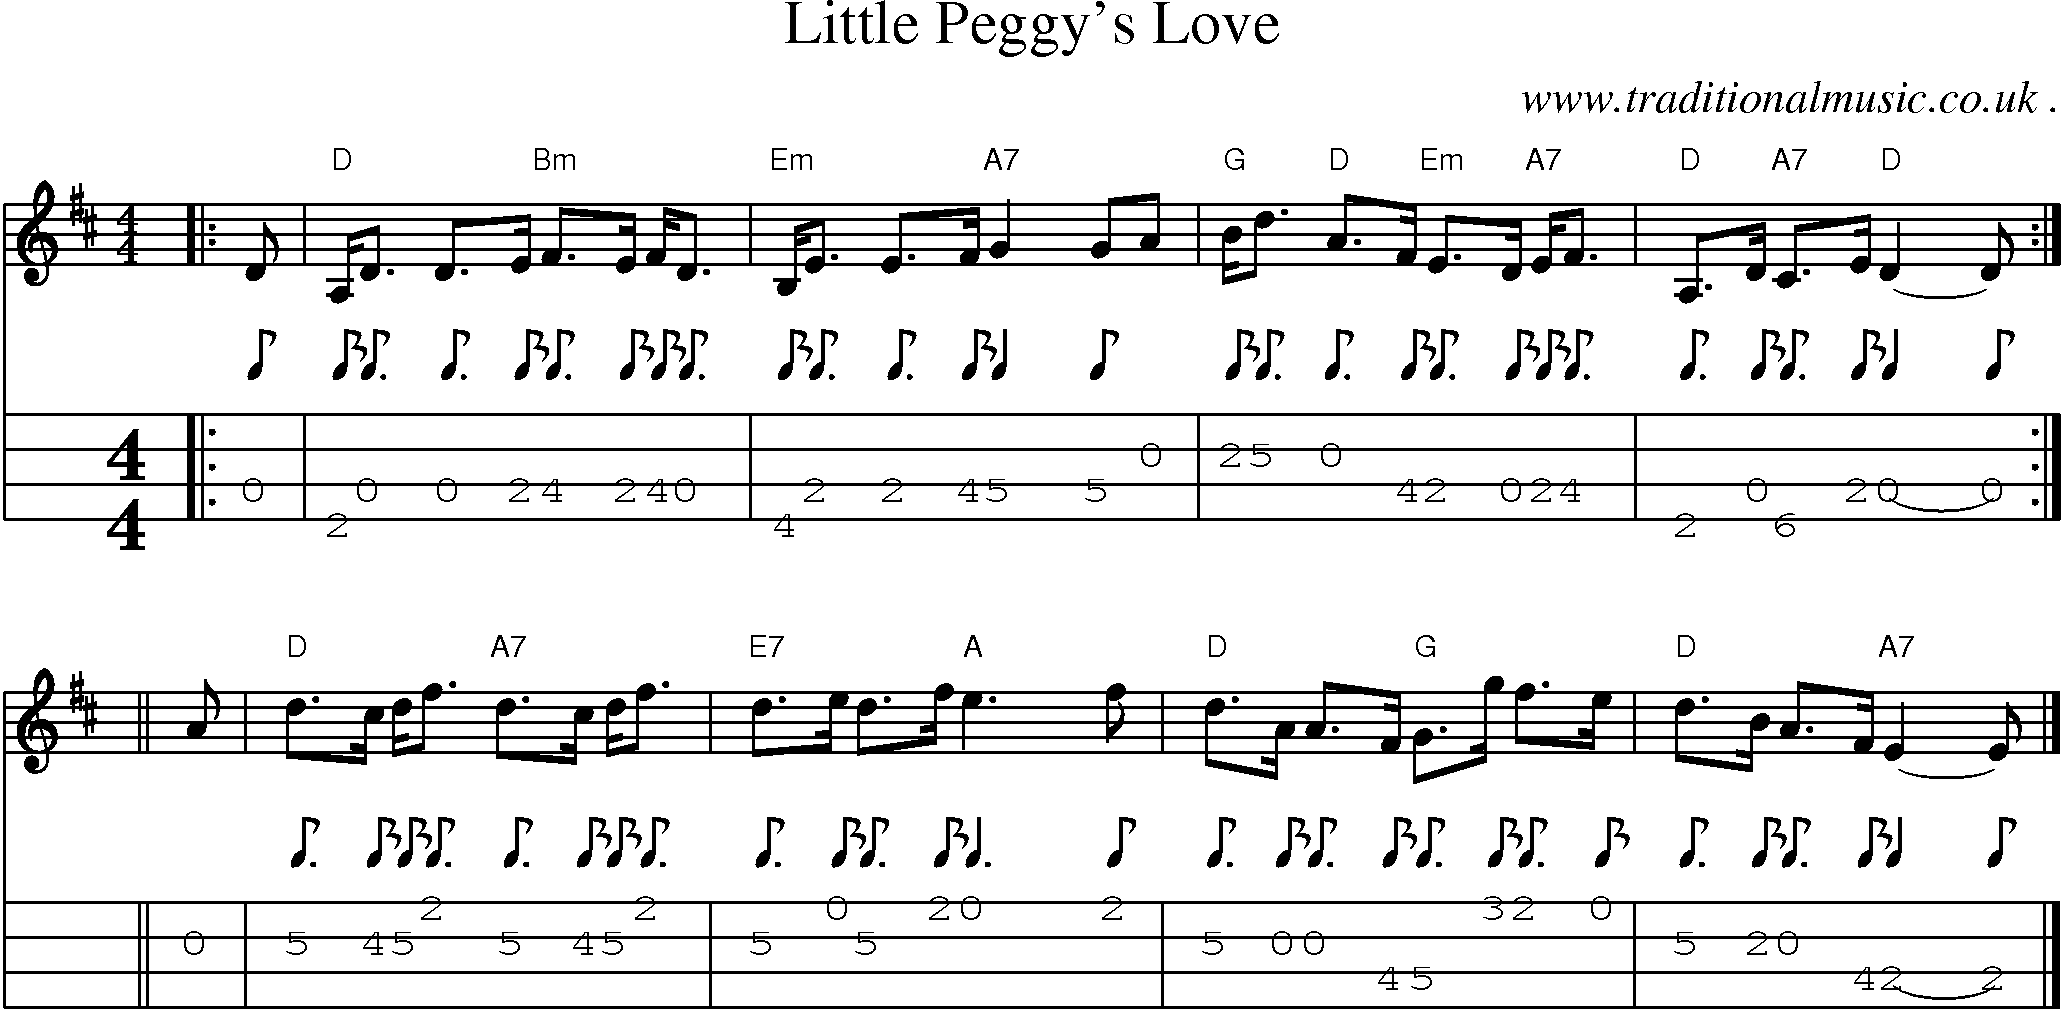 Sheet-music  score, Chords and Mandolin Tabs for Little Peggys Love